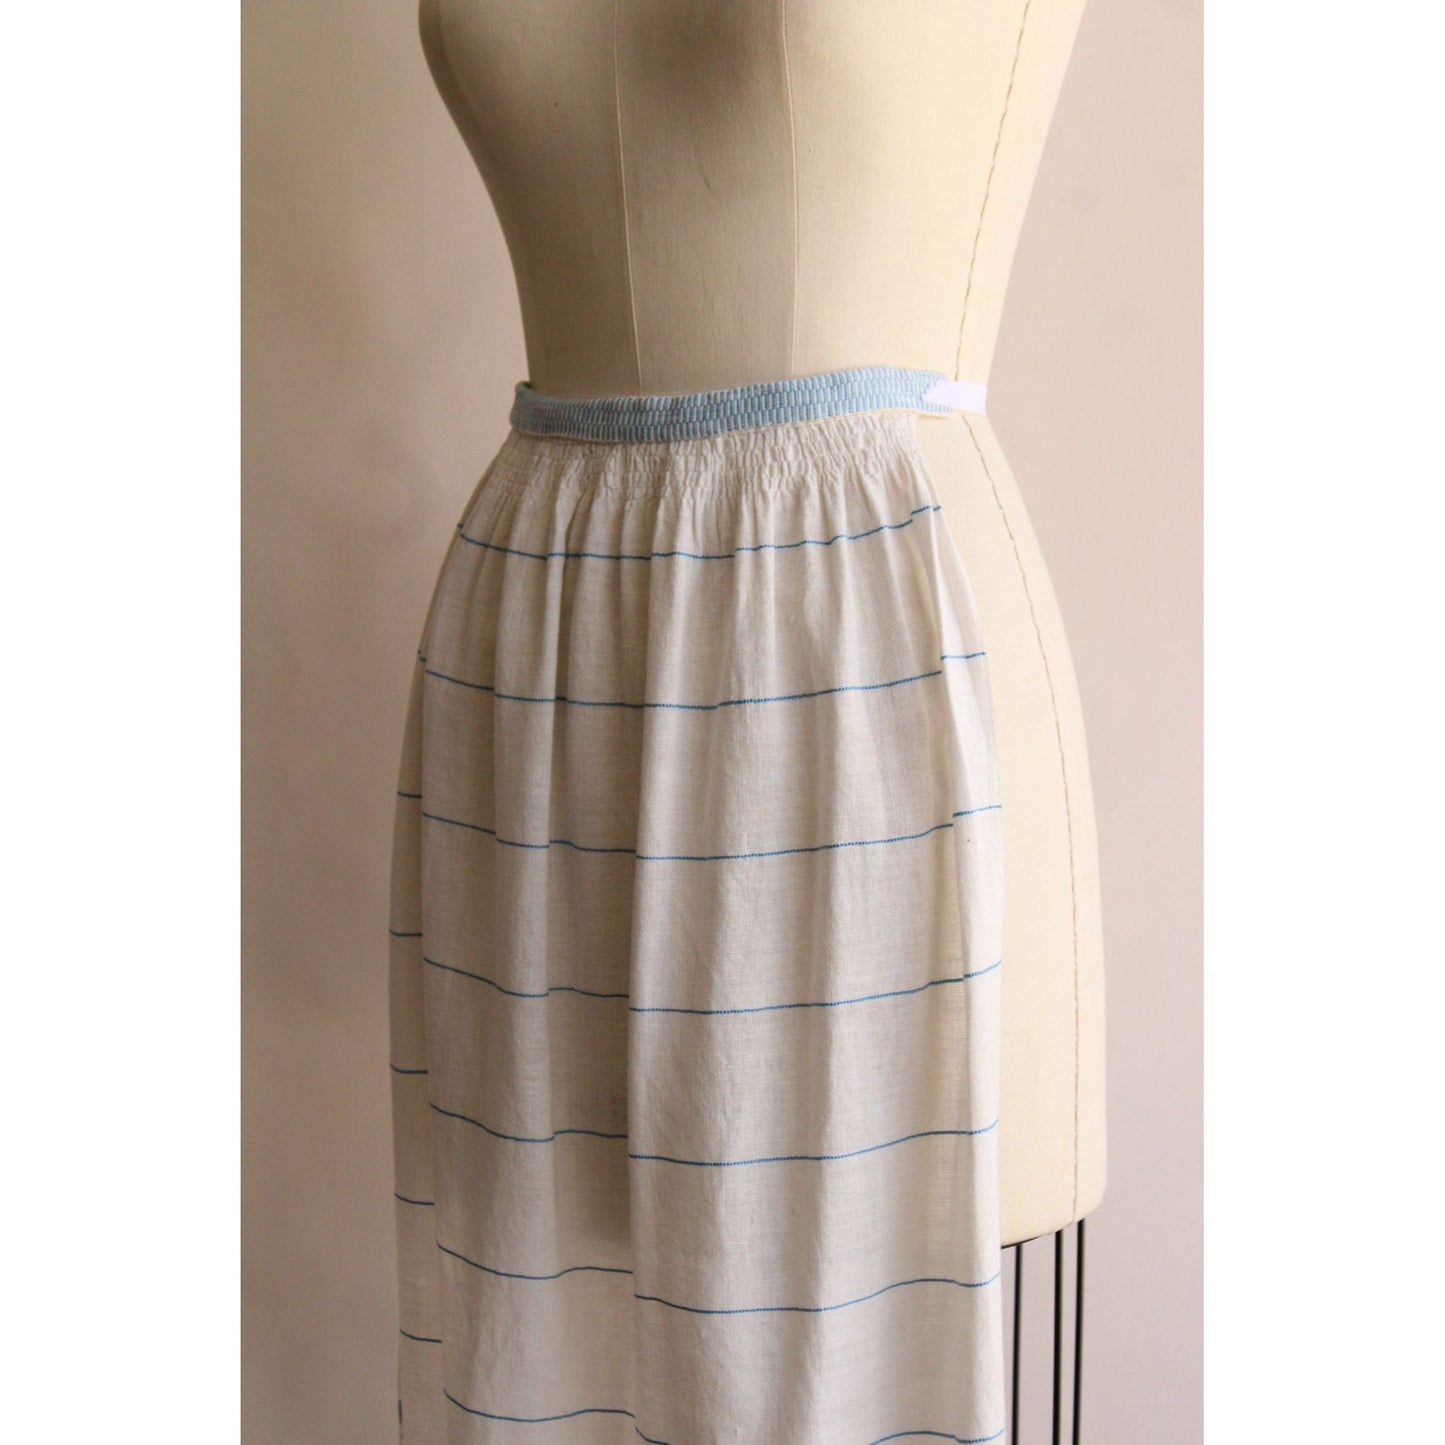 Vintage 1930s 1940s White and Blue Linen with Smocking Half Apron